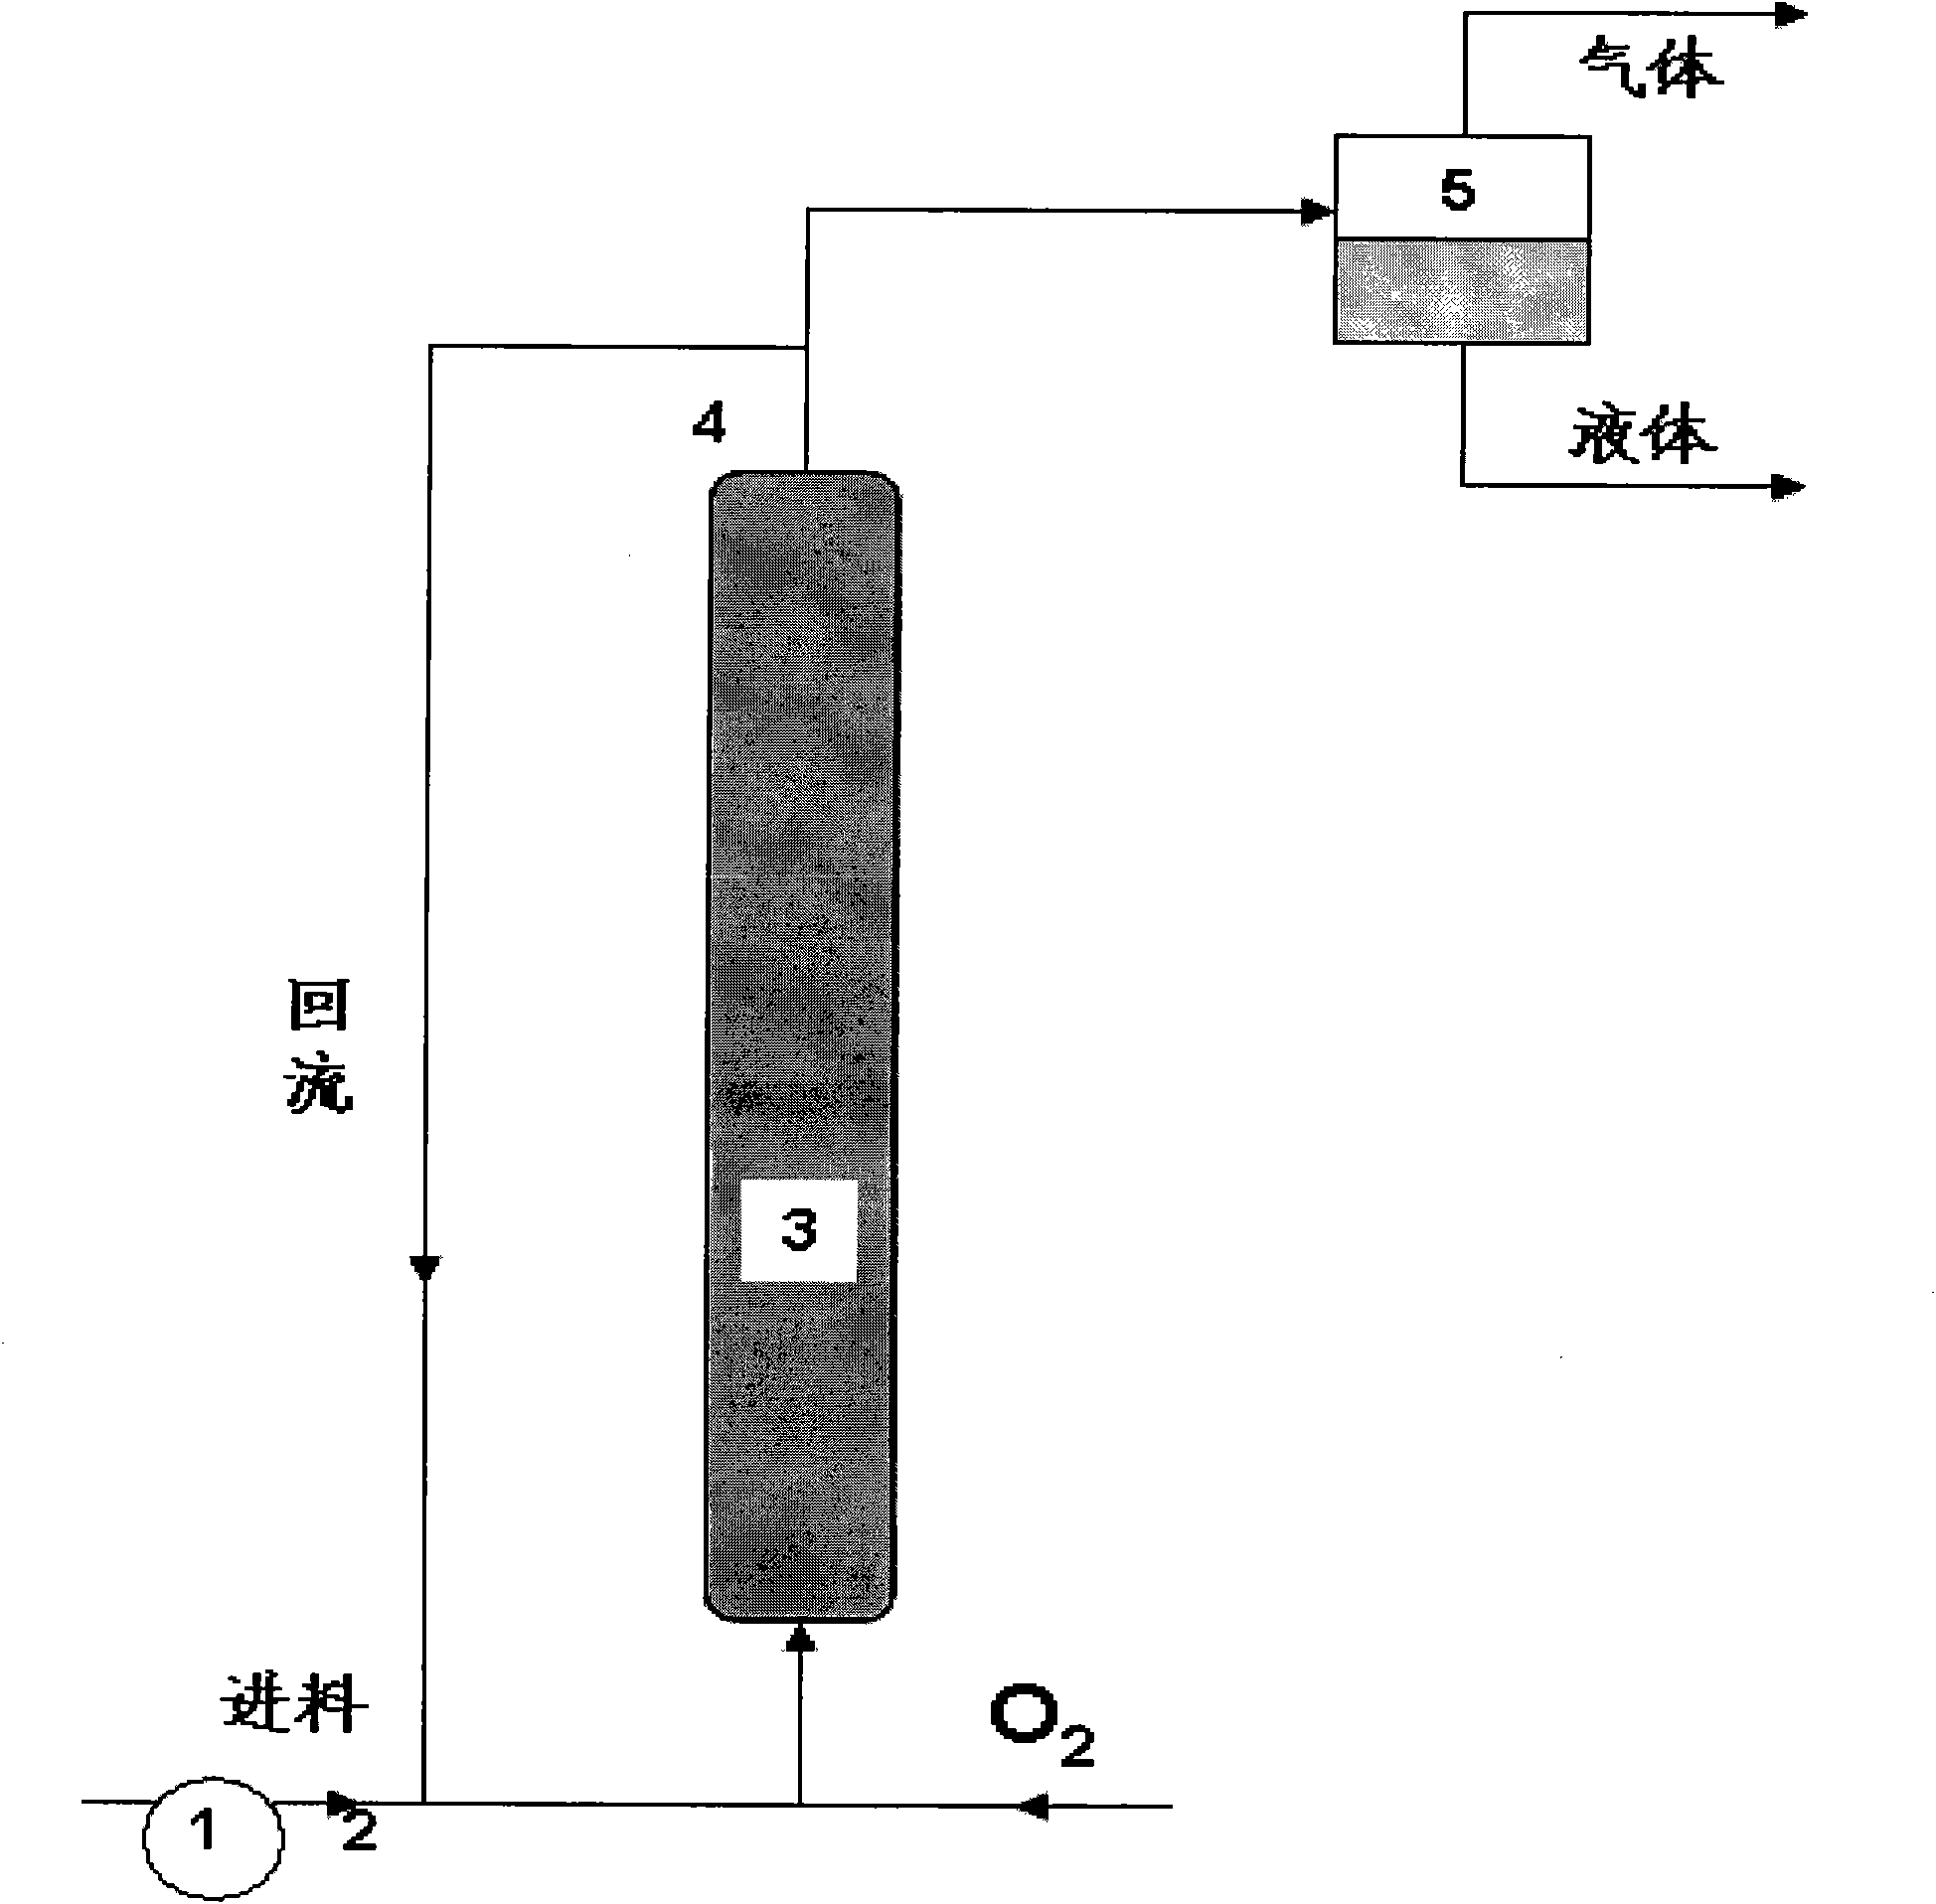 Method for preparing trimethylbenzoquinone with resin-supported catalyst